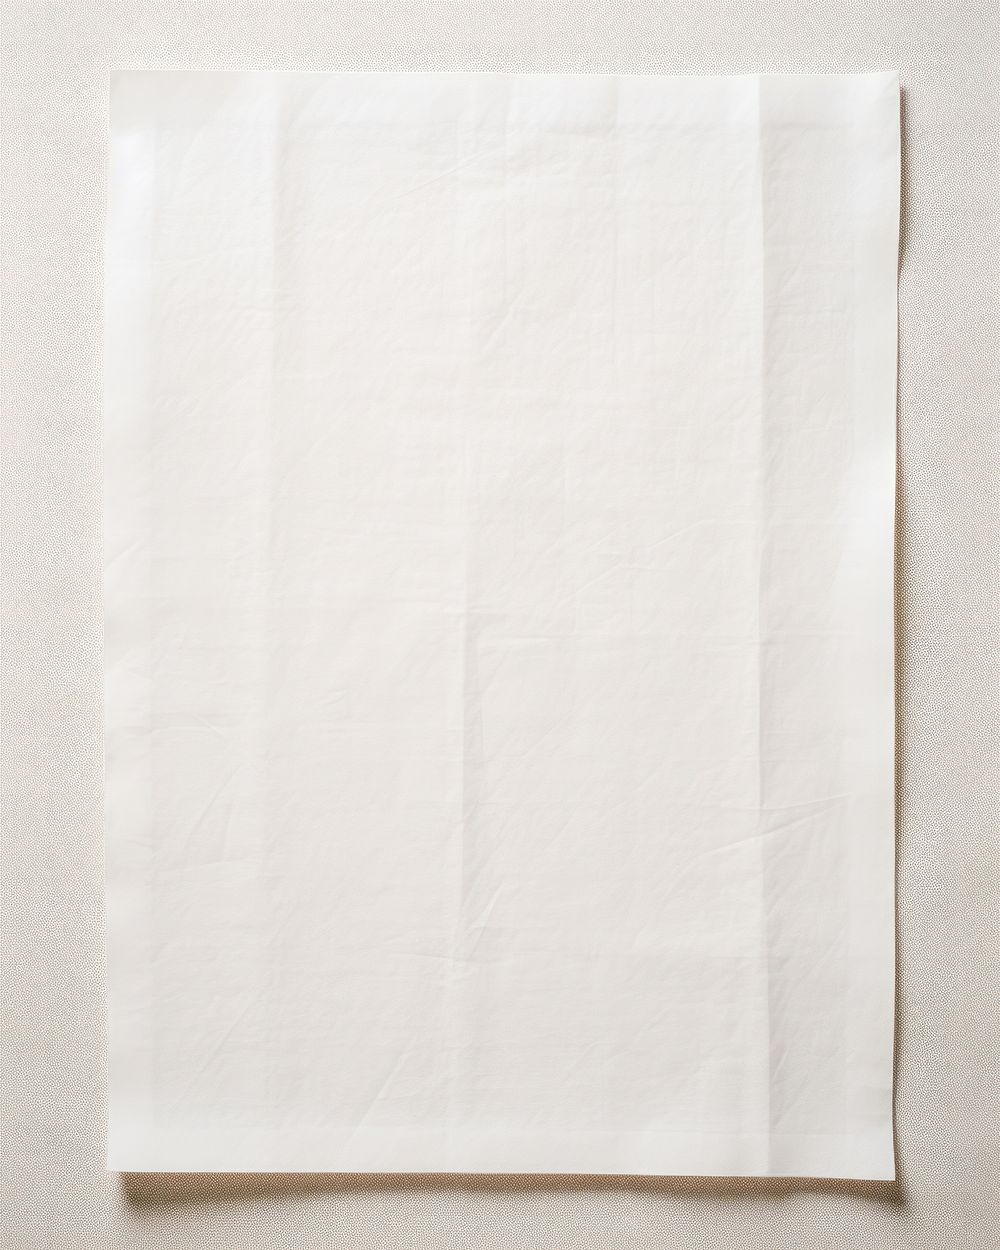 Wrinkled Paper paper backgrounds white.